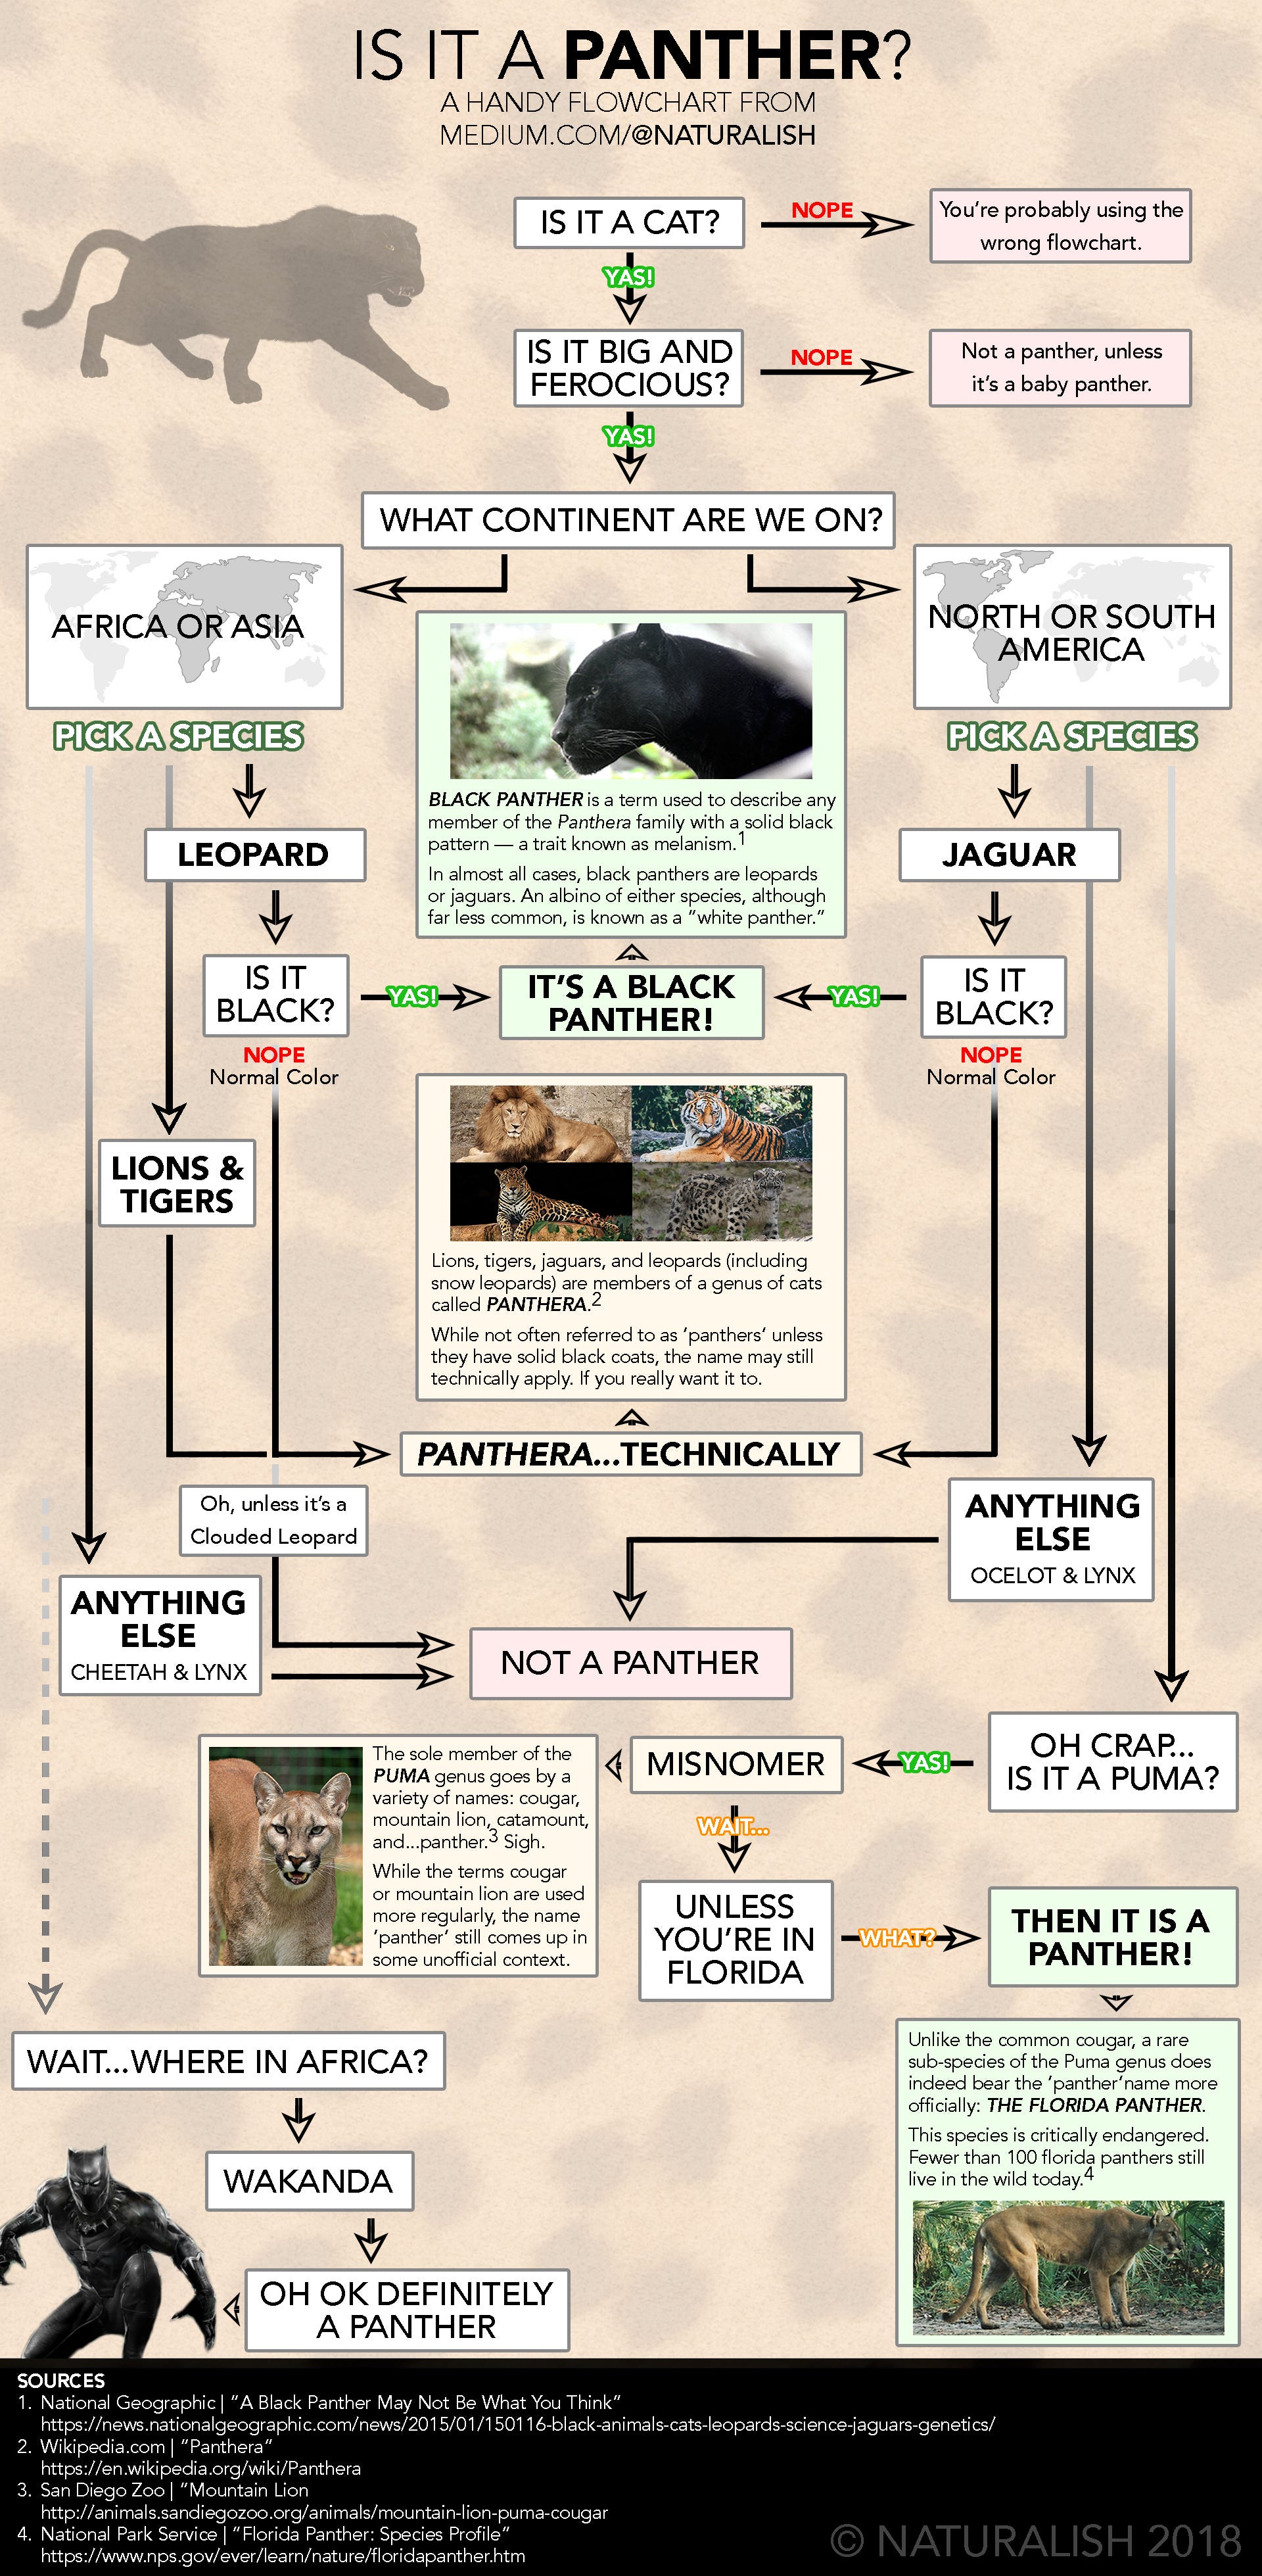 Is It a Panther? A Handy Guide. From Black Panthers to Florida Panthers… |  by Naturalish | Medium